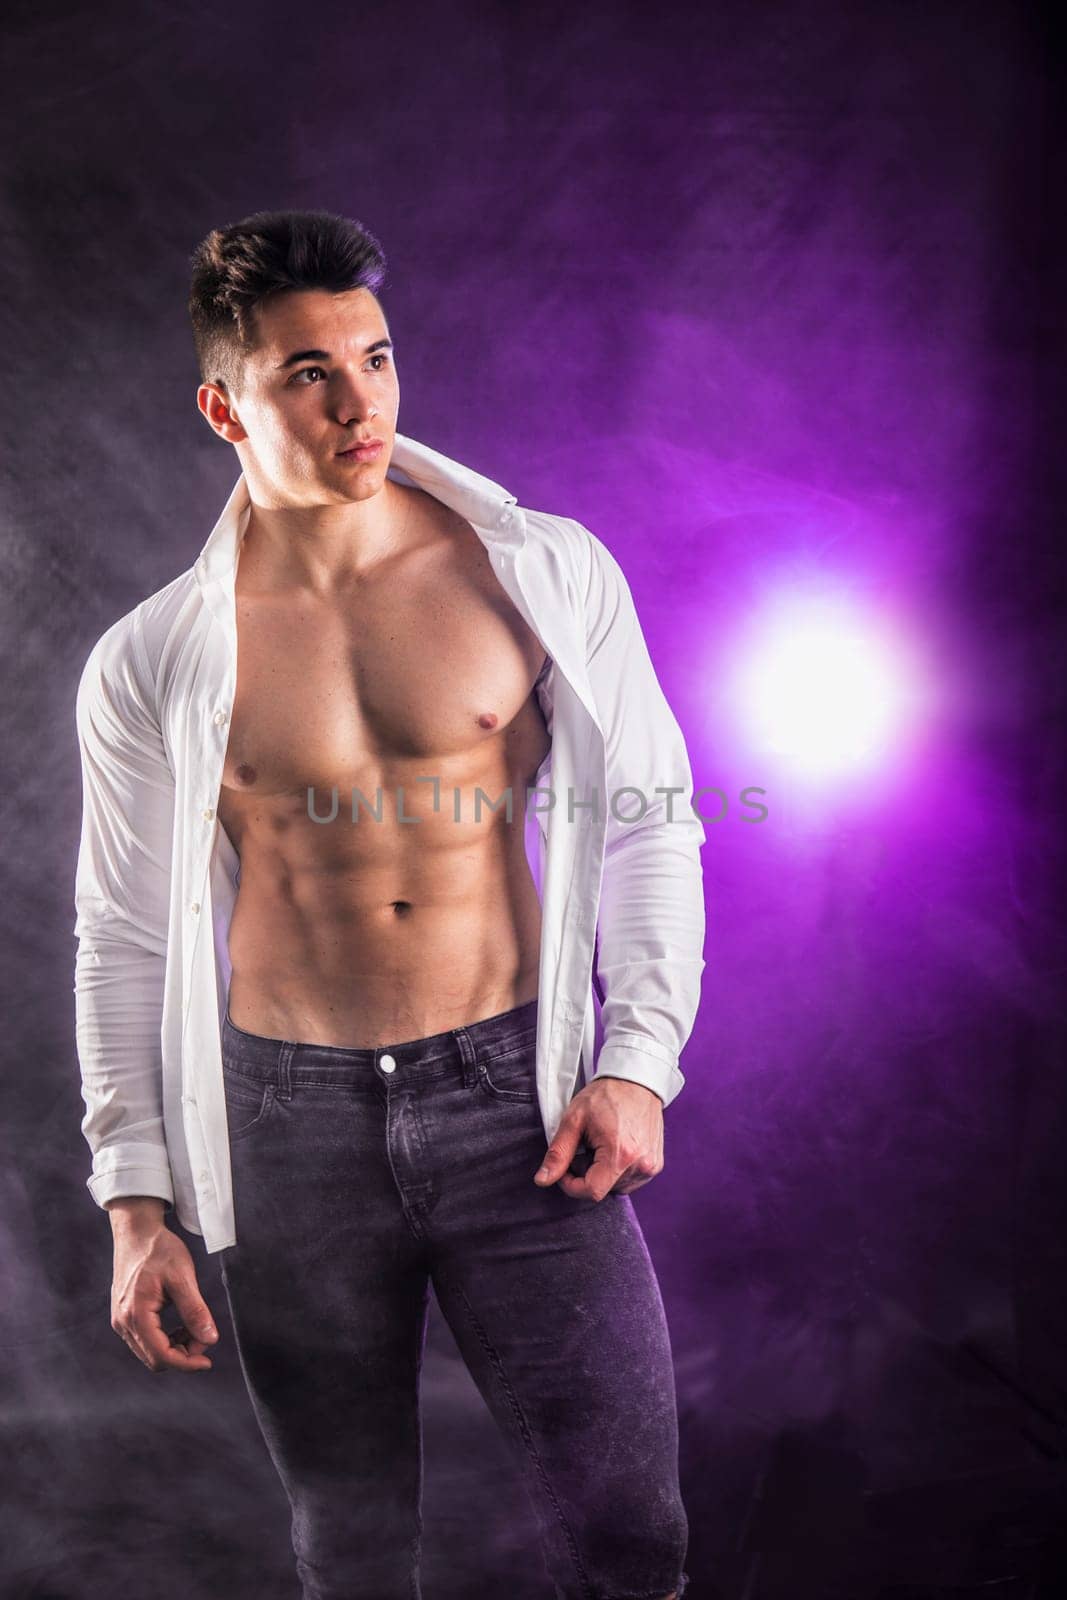 Handsome young muscular man shirtless wearing jeans, taking off leather jacket on naked muscle torso, on dark background in studio shot